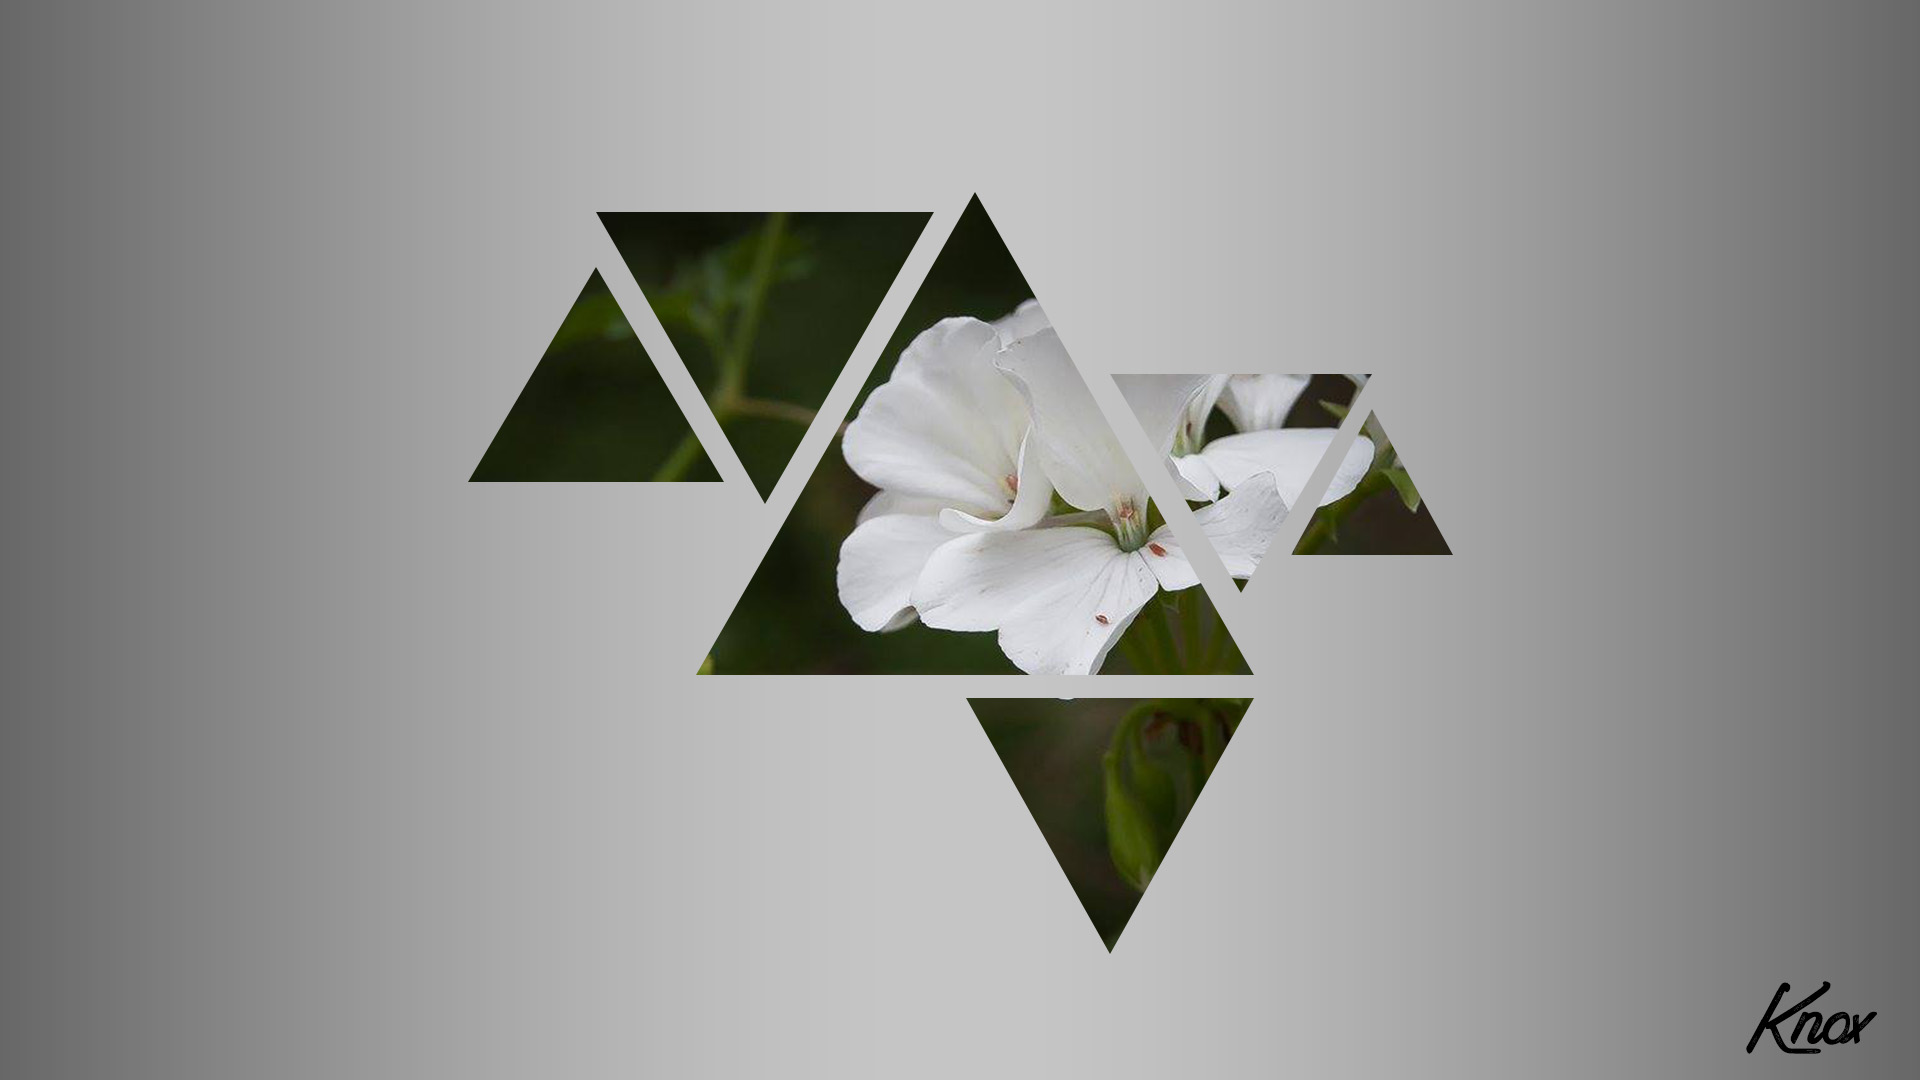 General 1920x1080 nature distortion triangle flowers simple background